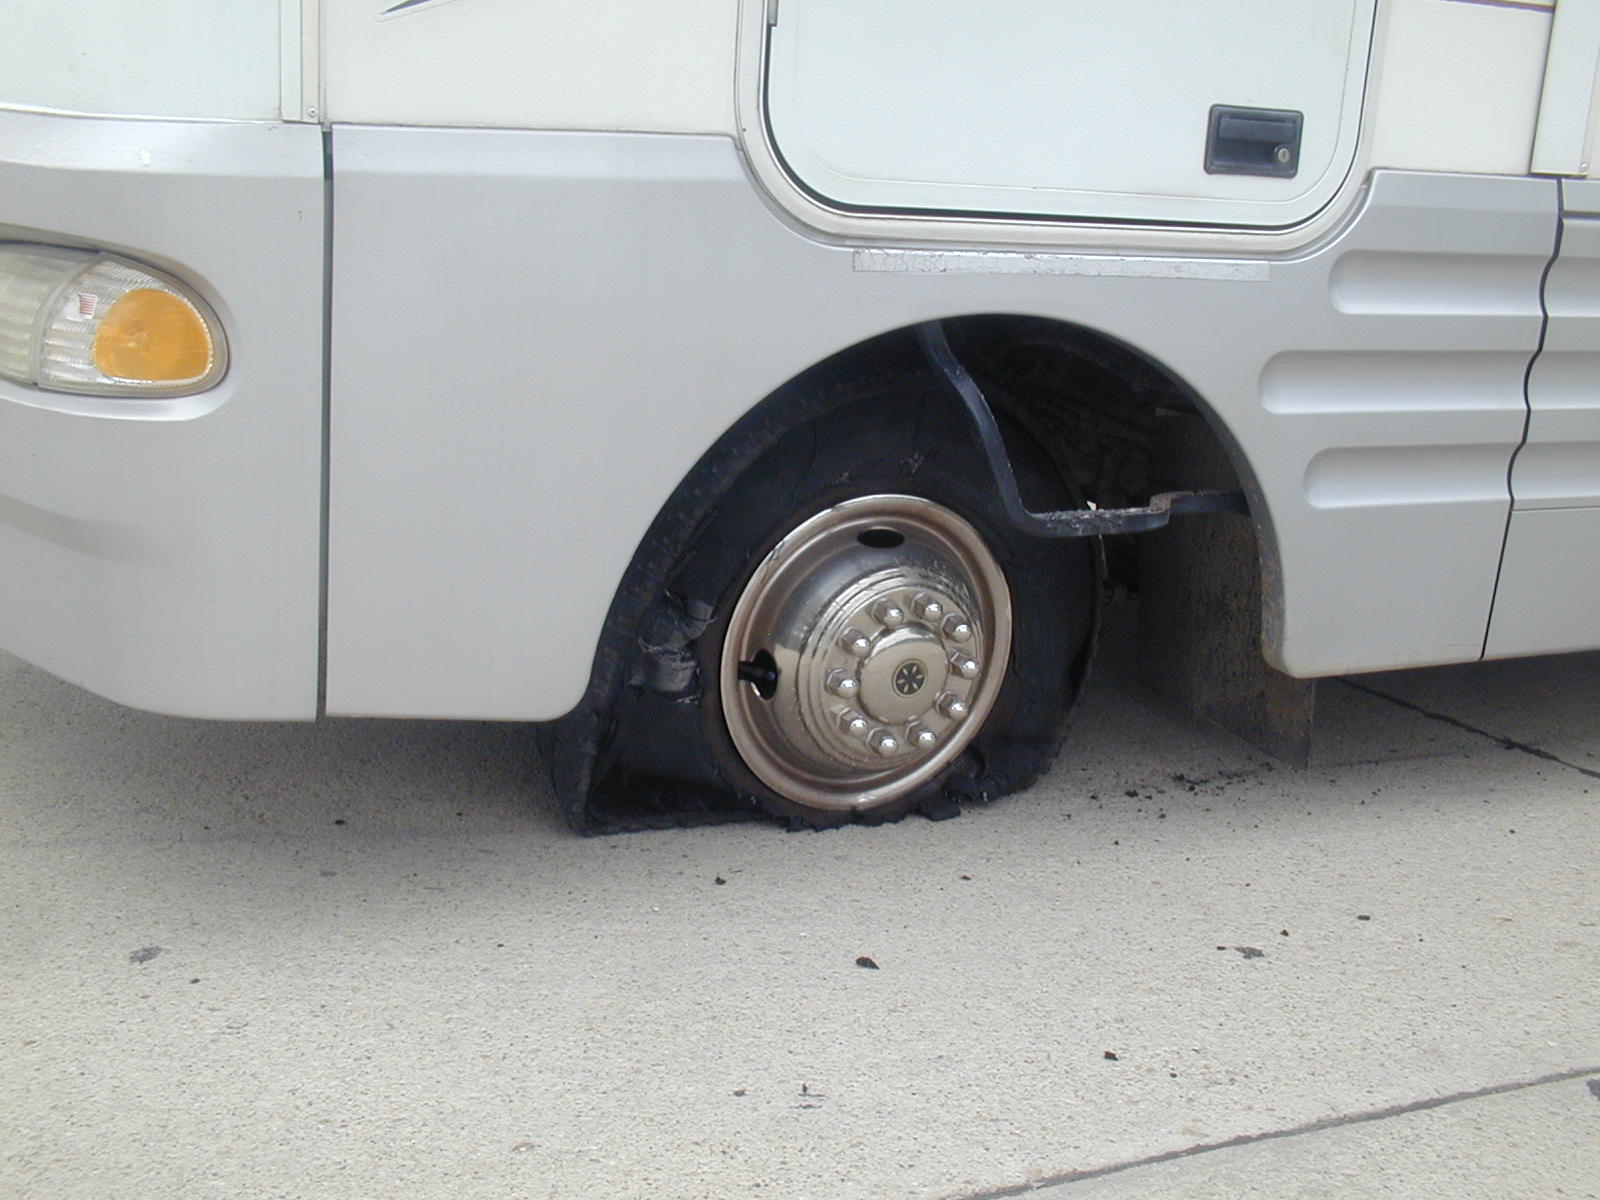 RV Tire Care Tips: Don’t Take Your Tires for Grantedarticle featured image thumbnail.